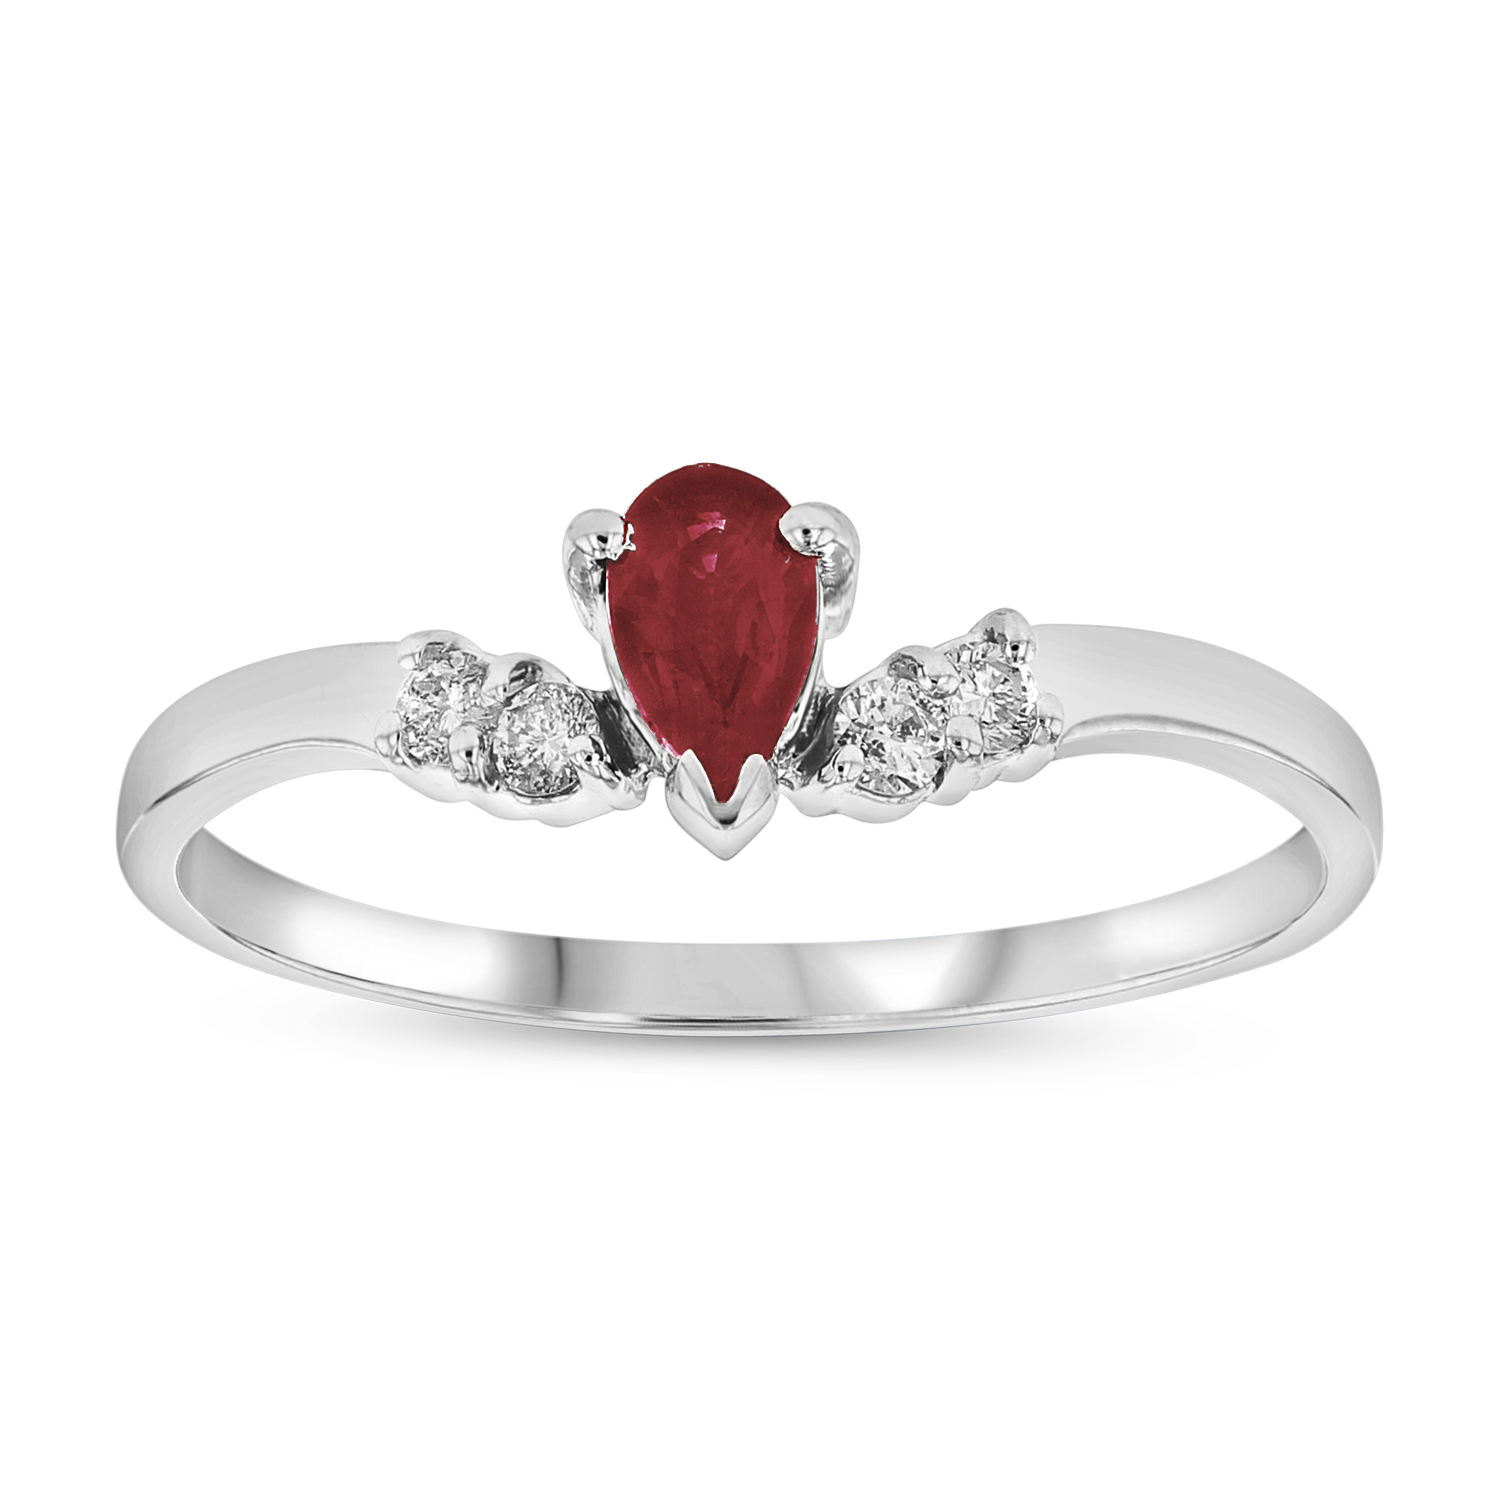 0.33ctw Diamond and Ruby  Ring in 14k Gold